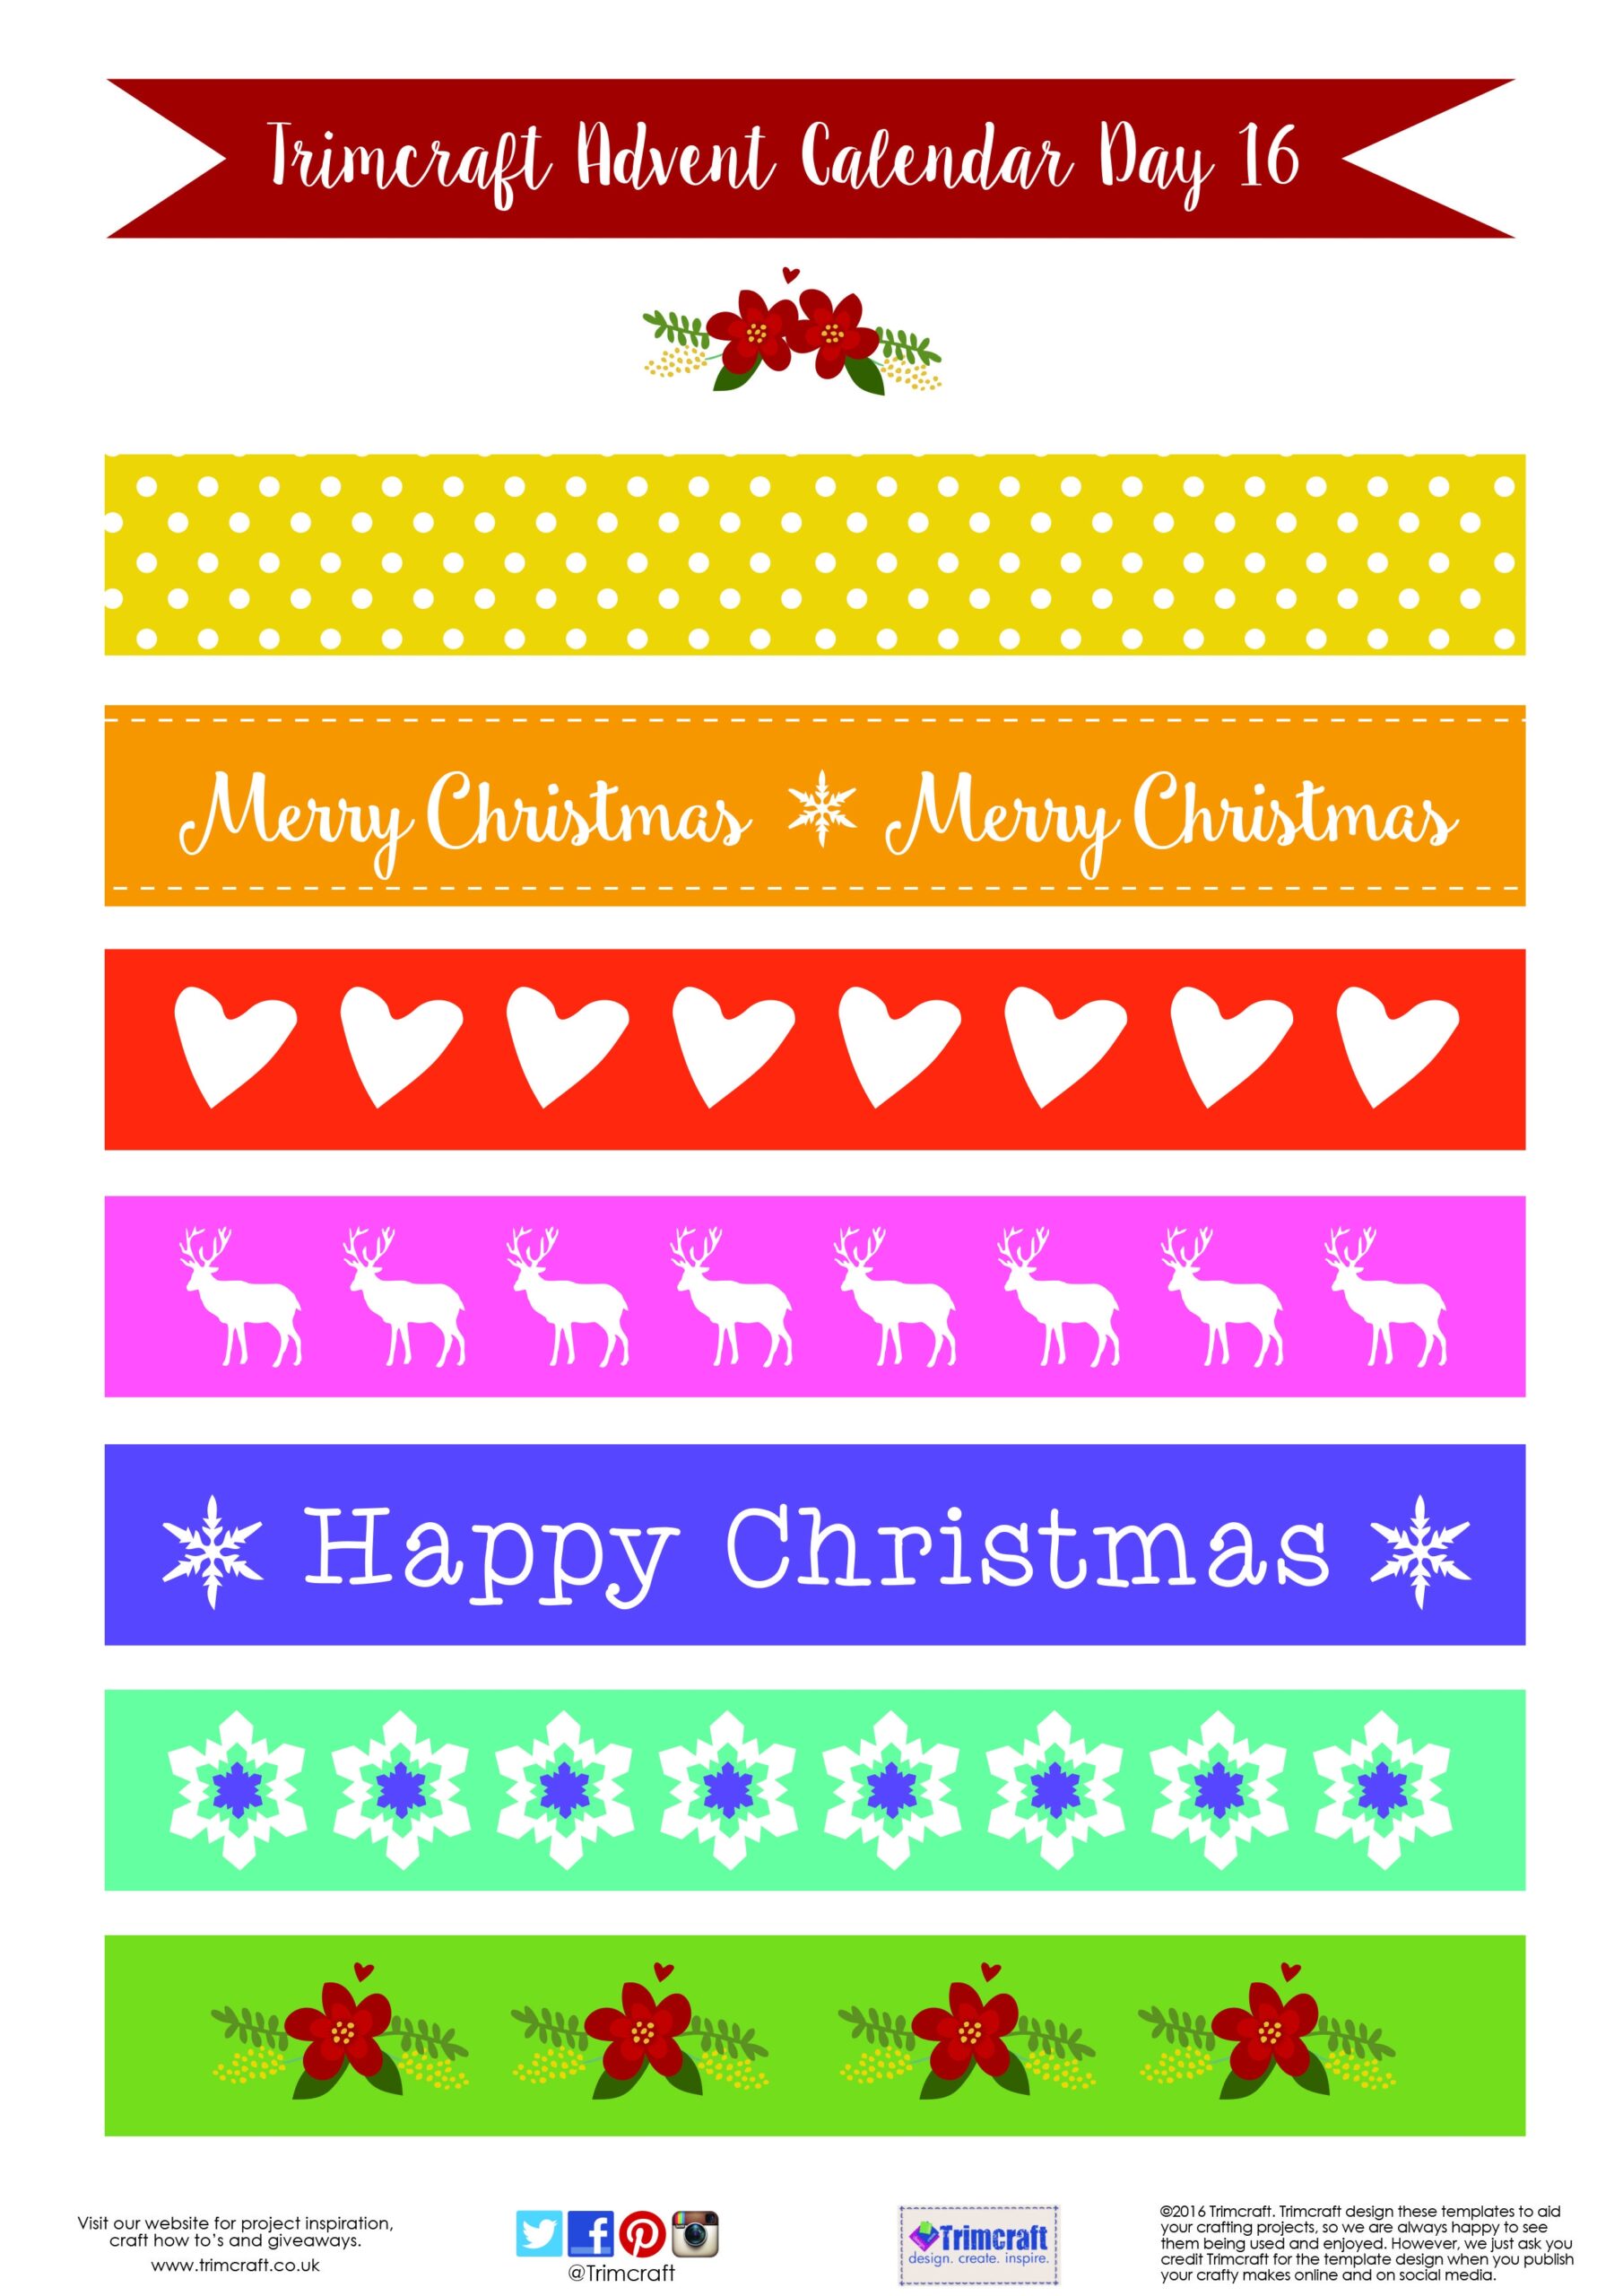 Trimcraft Advent Calendar Day 16 Free Printable Paper Chain Template Christmas Paper Chains Paper Chains Templates Printable Free